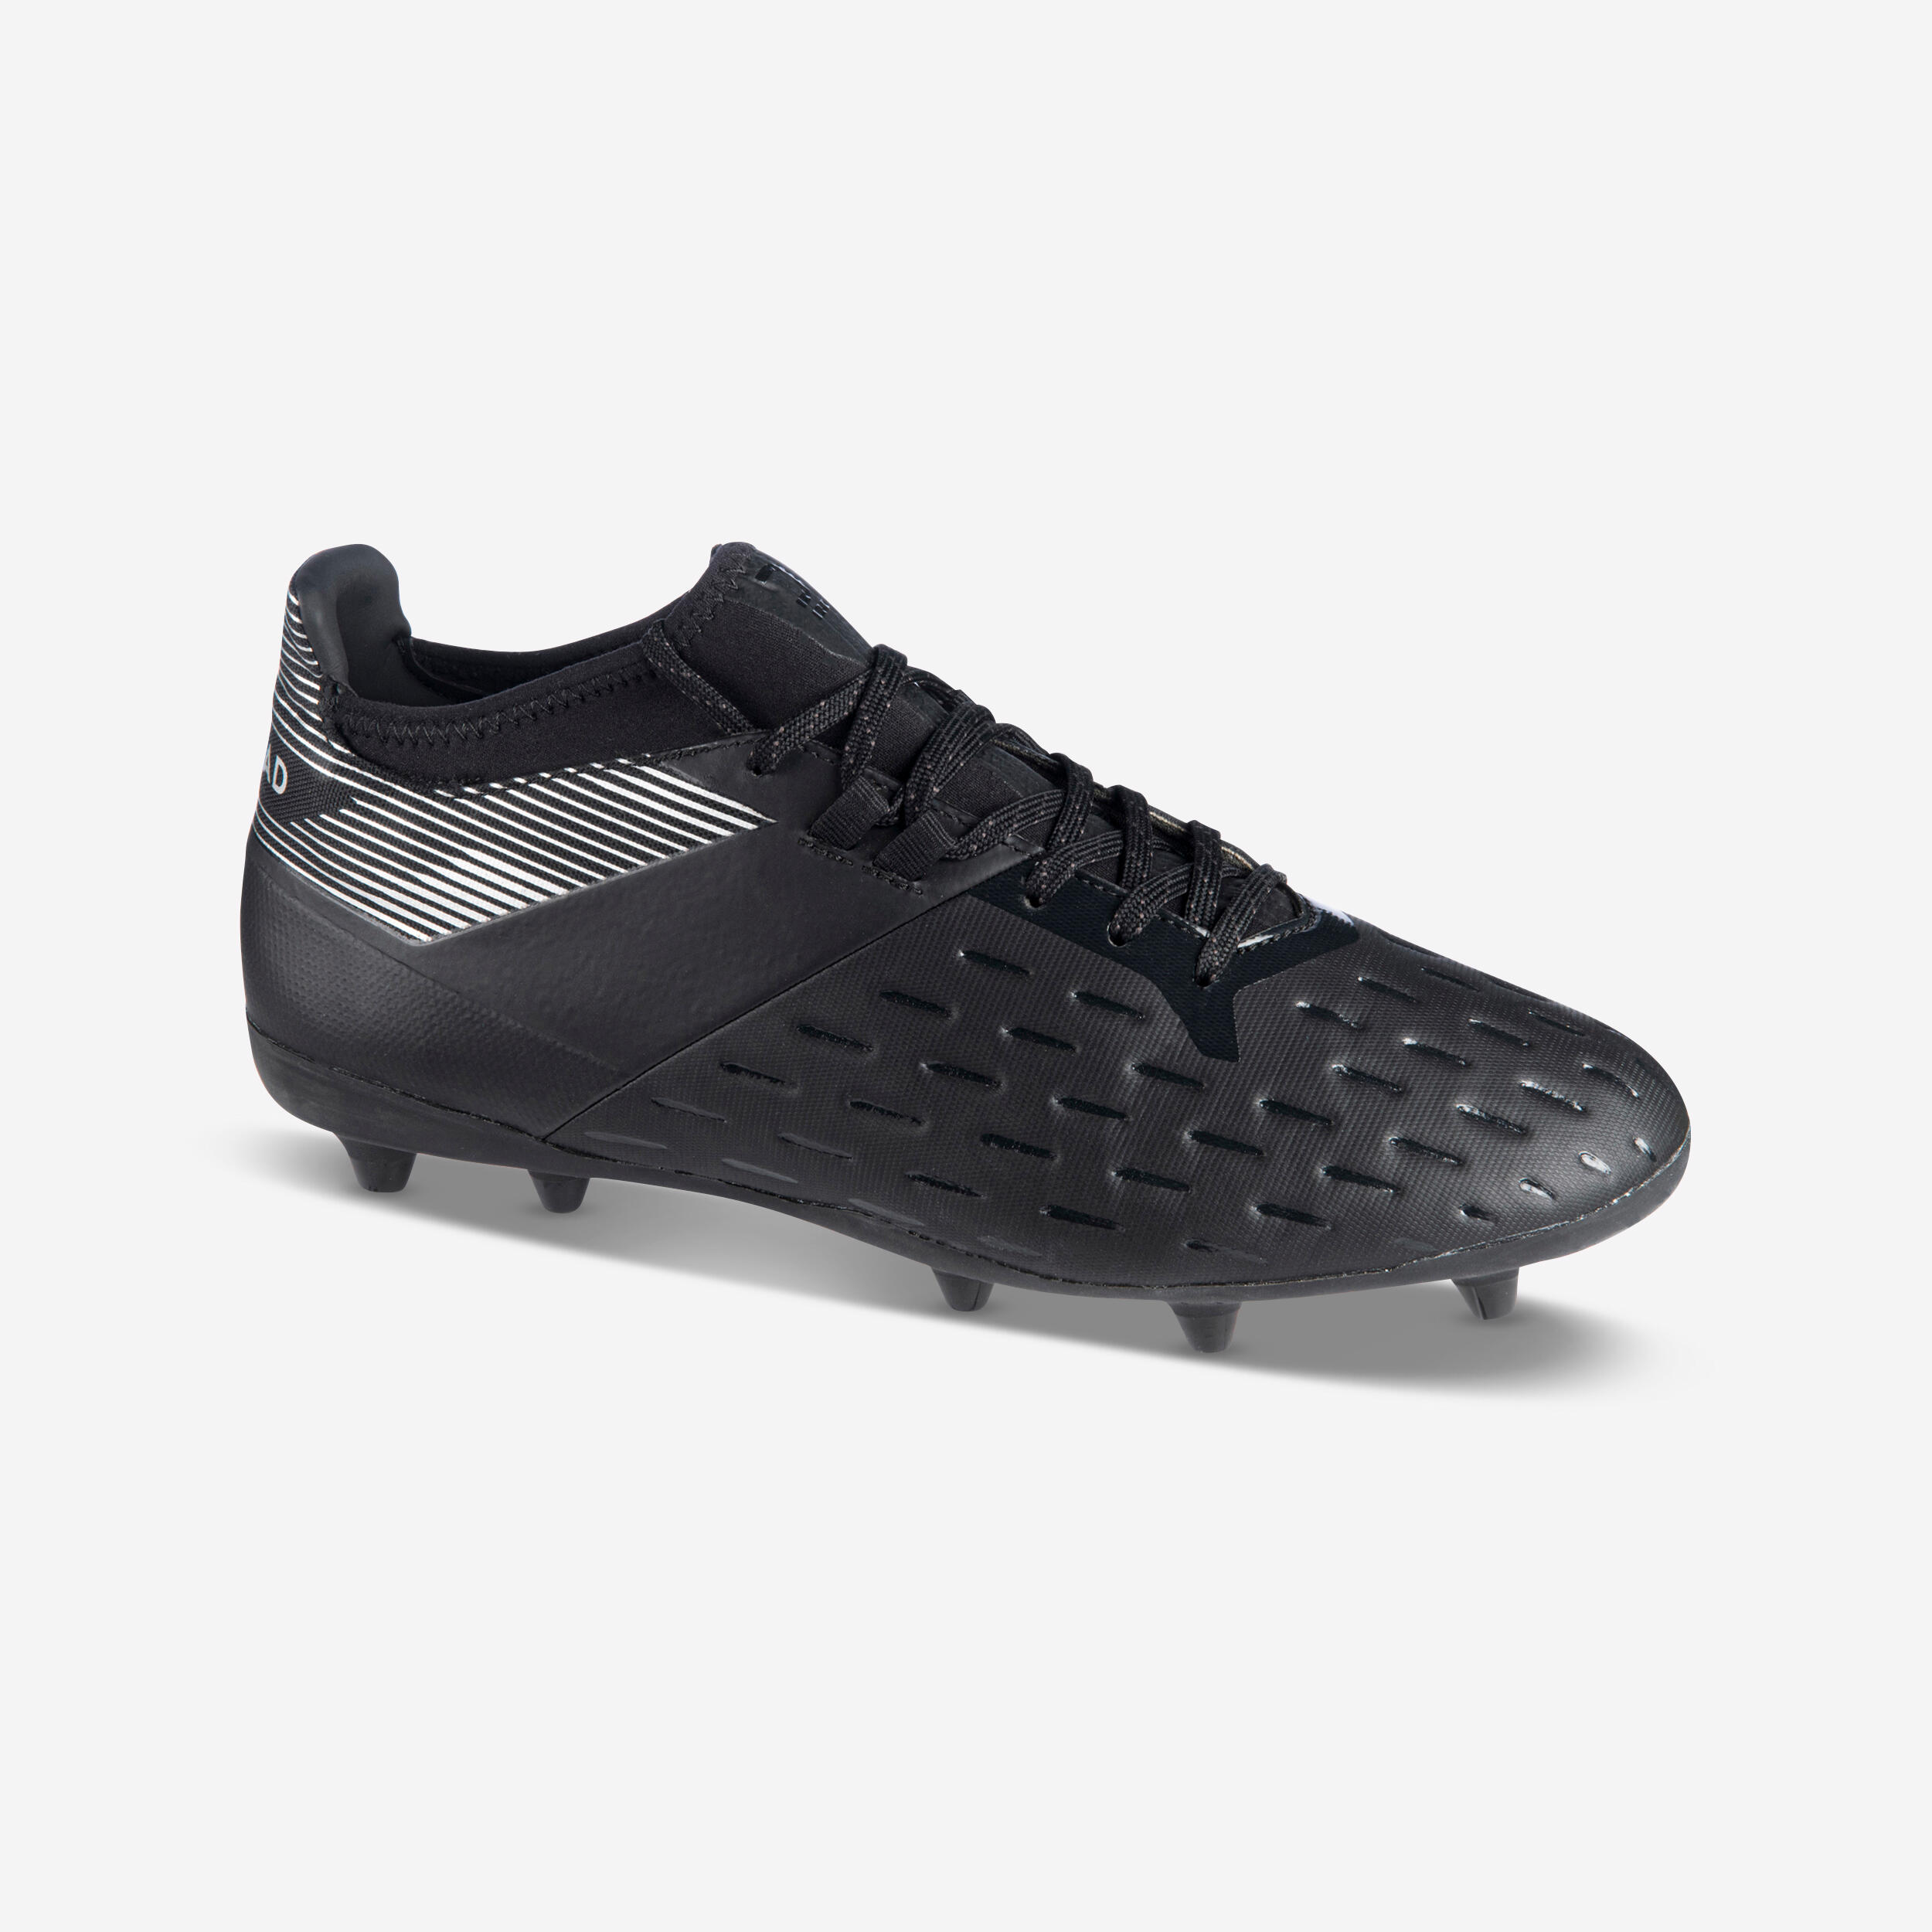 Adult Dry Artificial Pitch Moulded Rugby Boots Advance 500 - Black/Grey 1/7